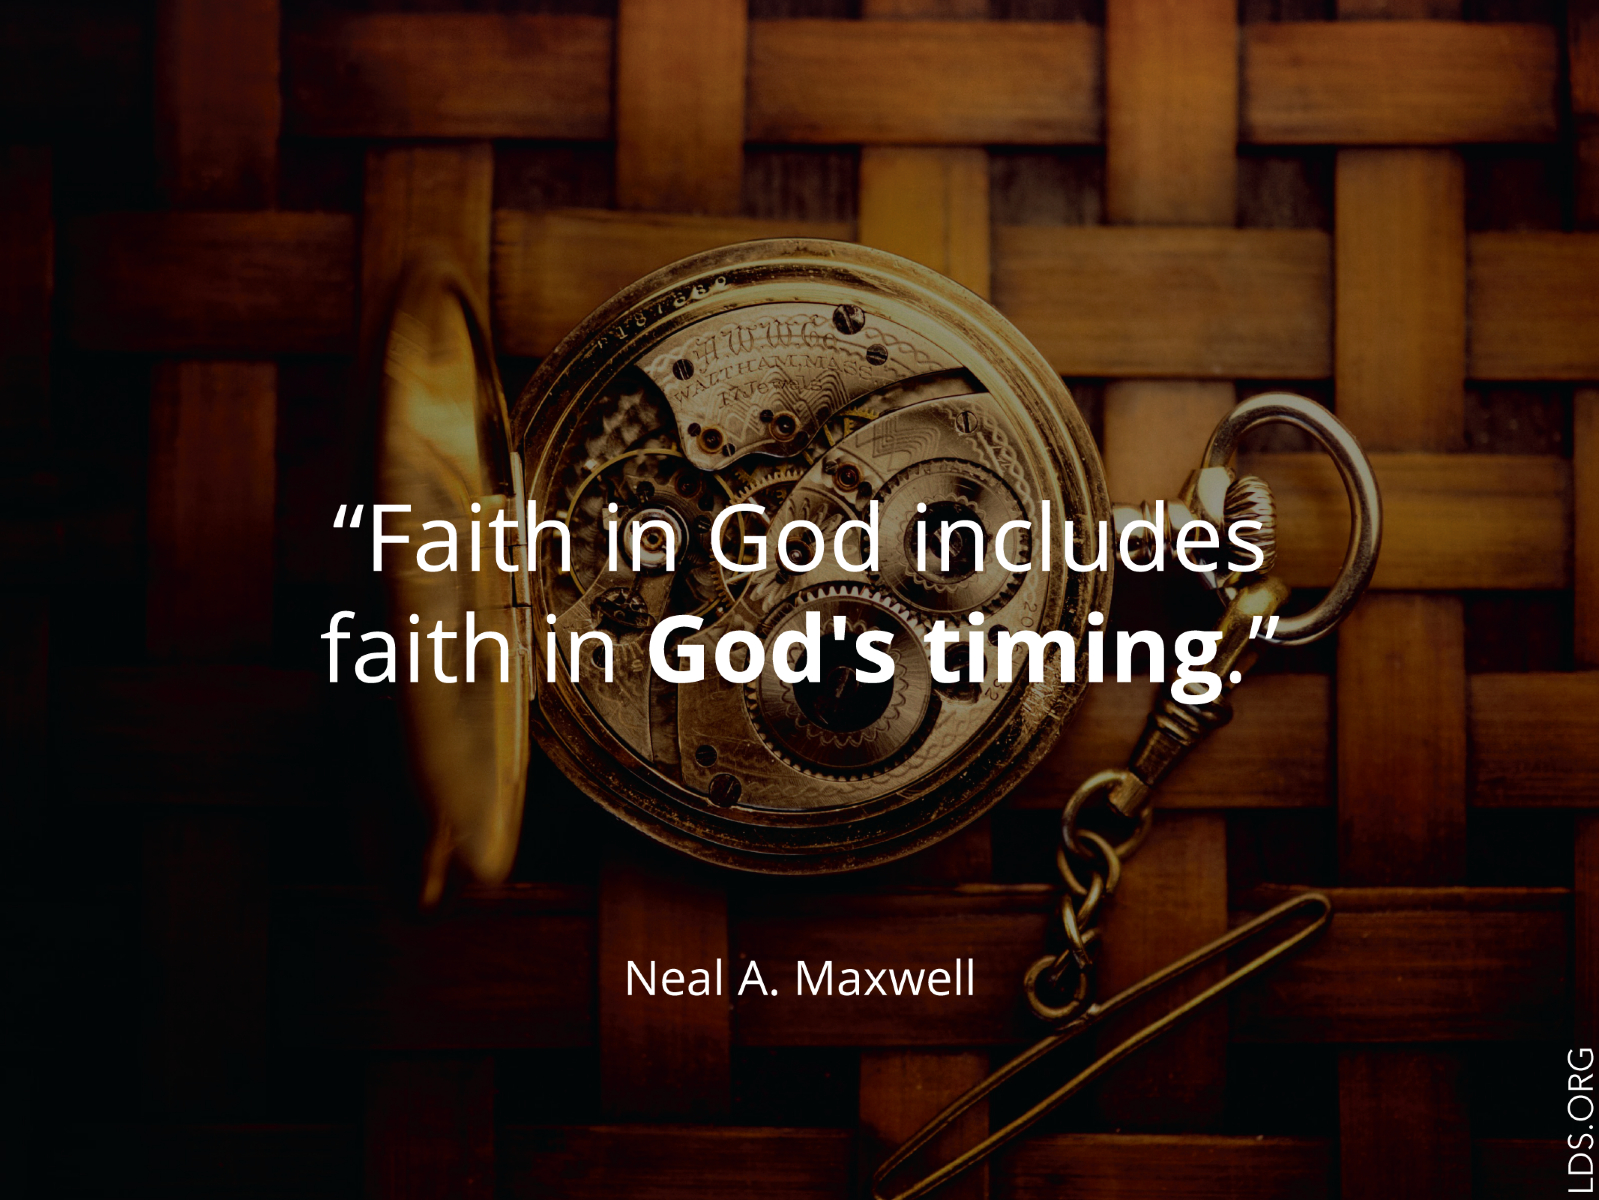 THE TIMING OF GOD